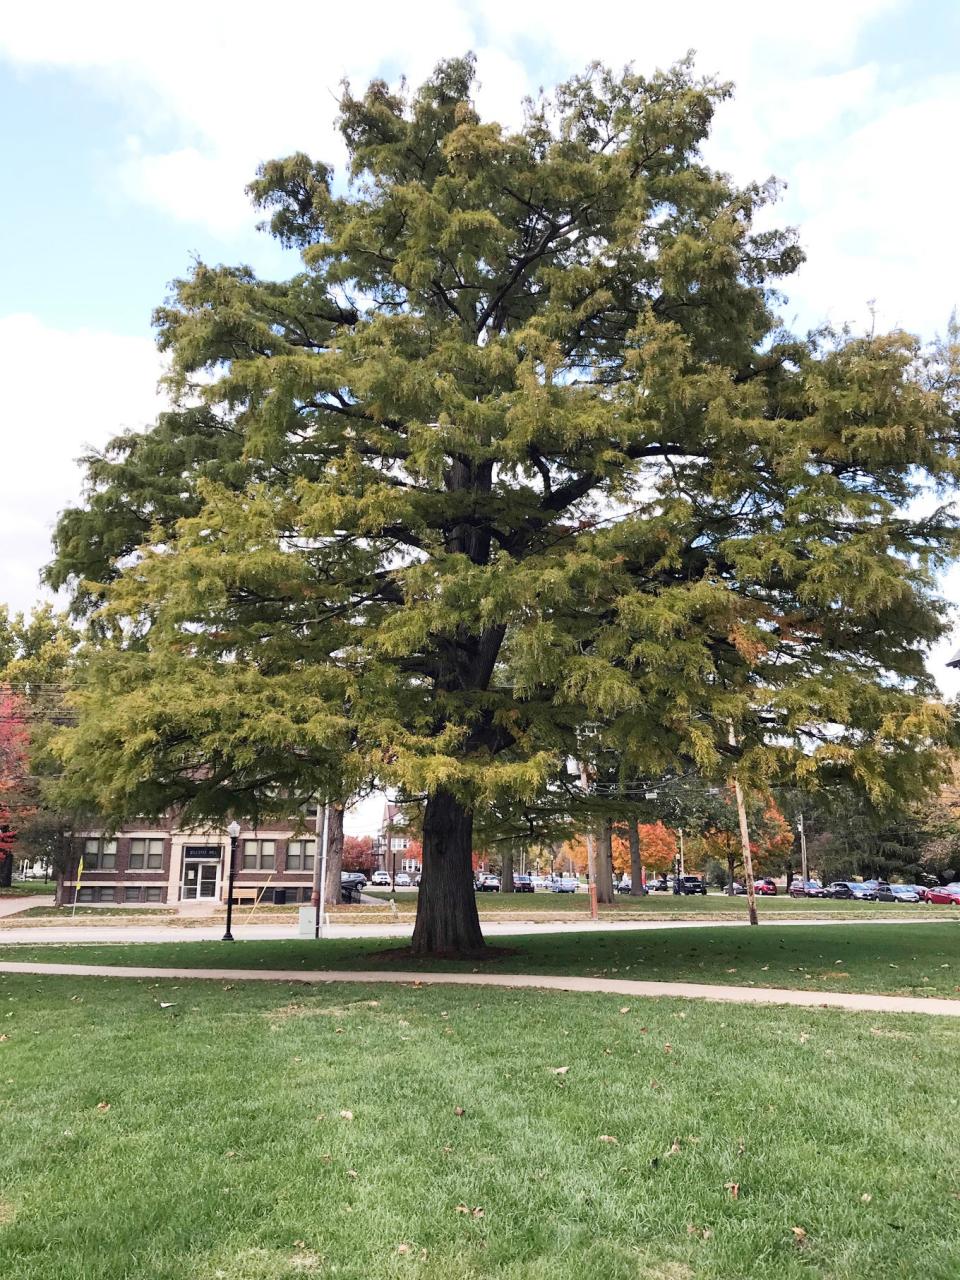 This bald cypress on the Knox College campus is Professor Stuart Allison’s favorite bald cypress in Galesburg. He said the tree was struck by lighting years ago, but has survived and continues to grow well.